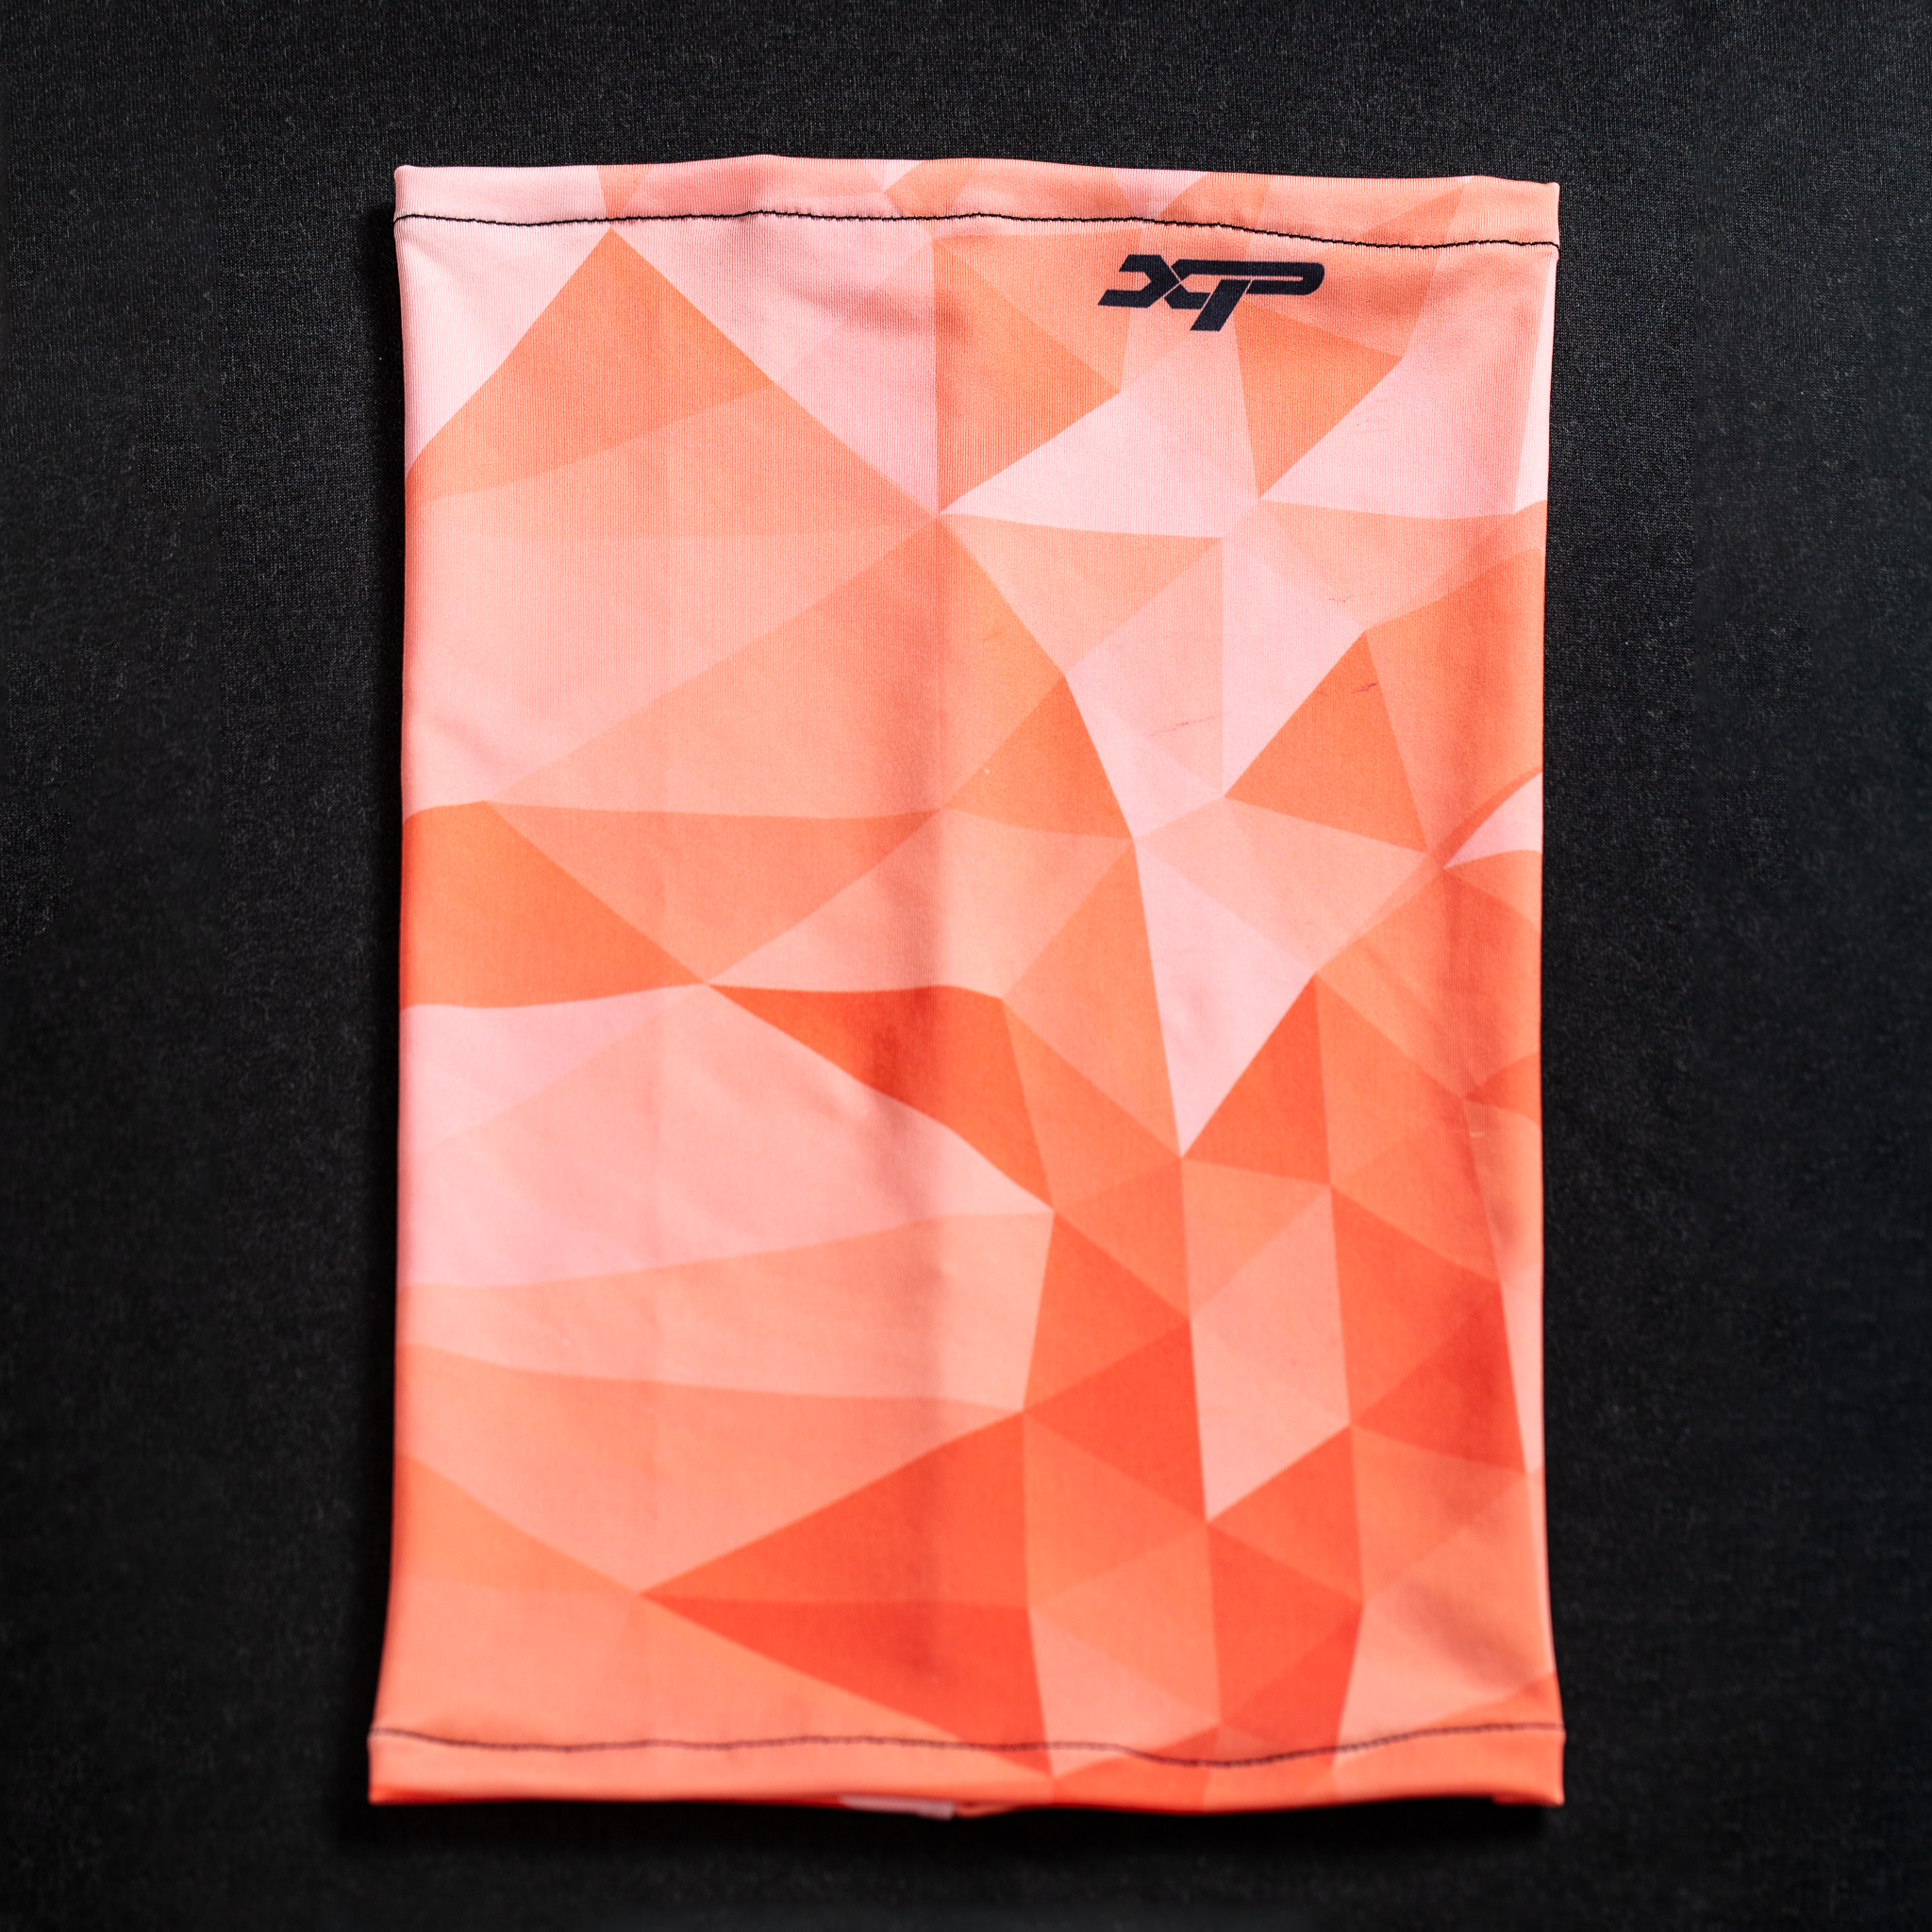 Sublimated Antimicrobial Neck Gaiter in Coral Xtreme Pro Apparel